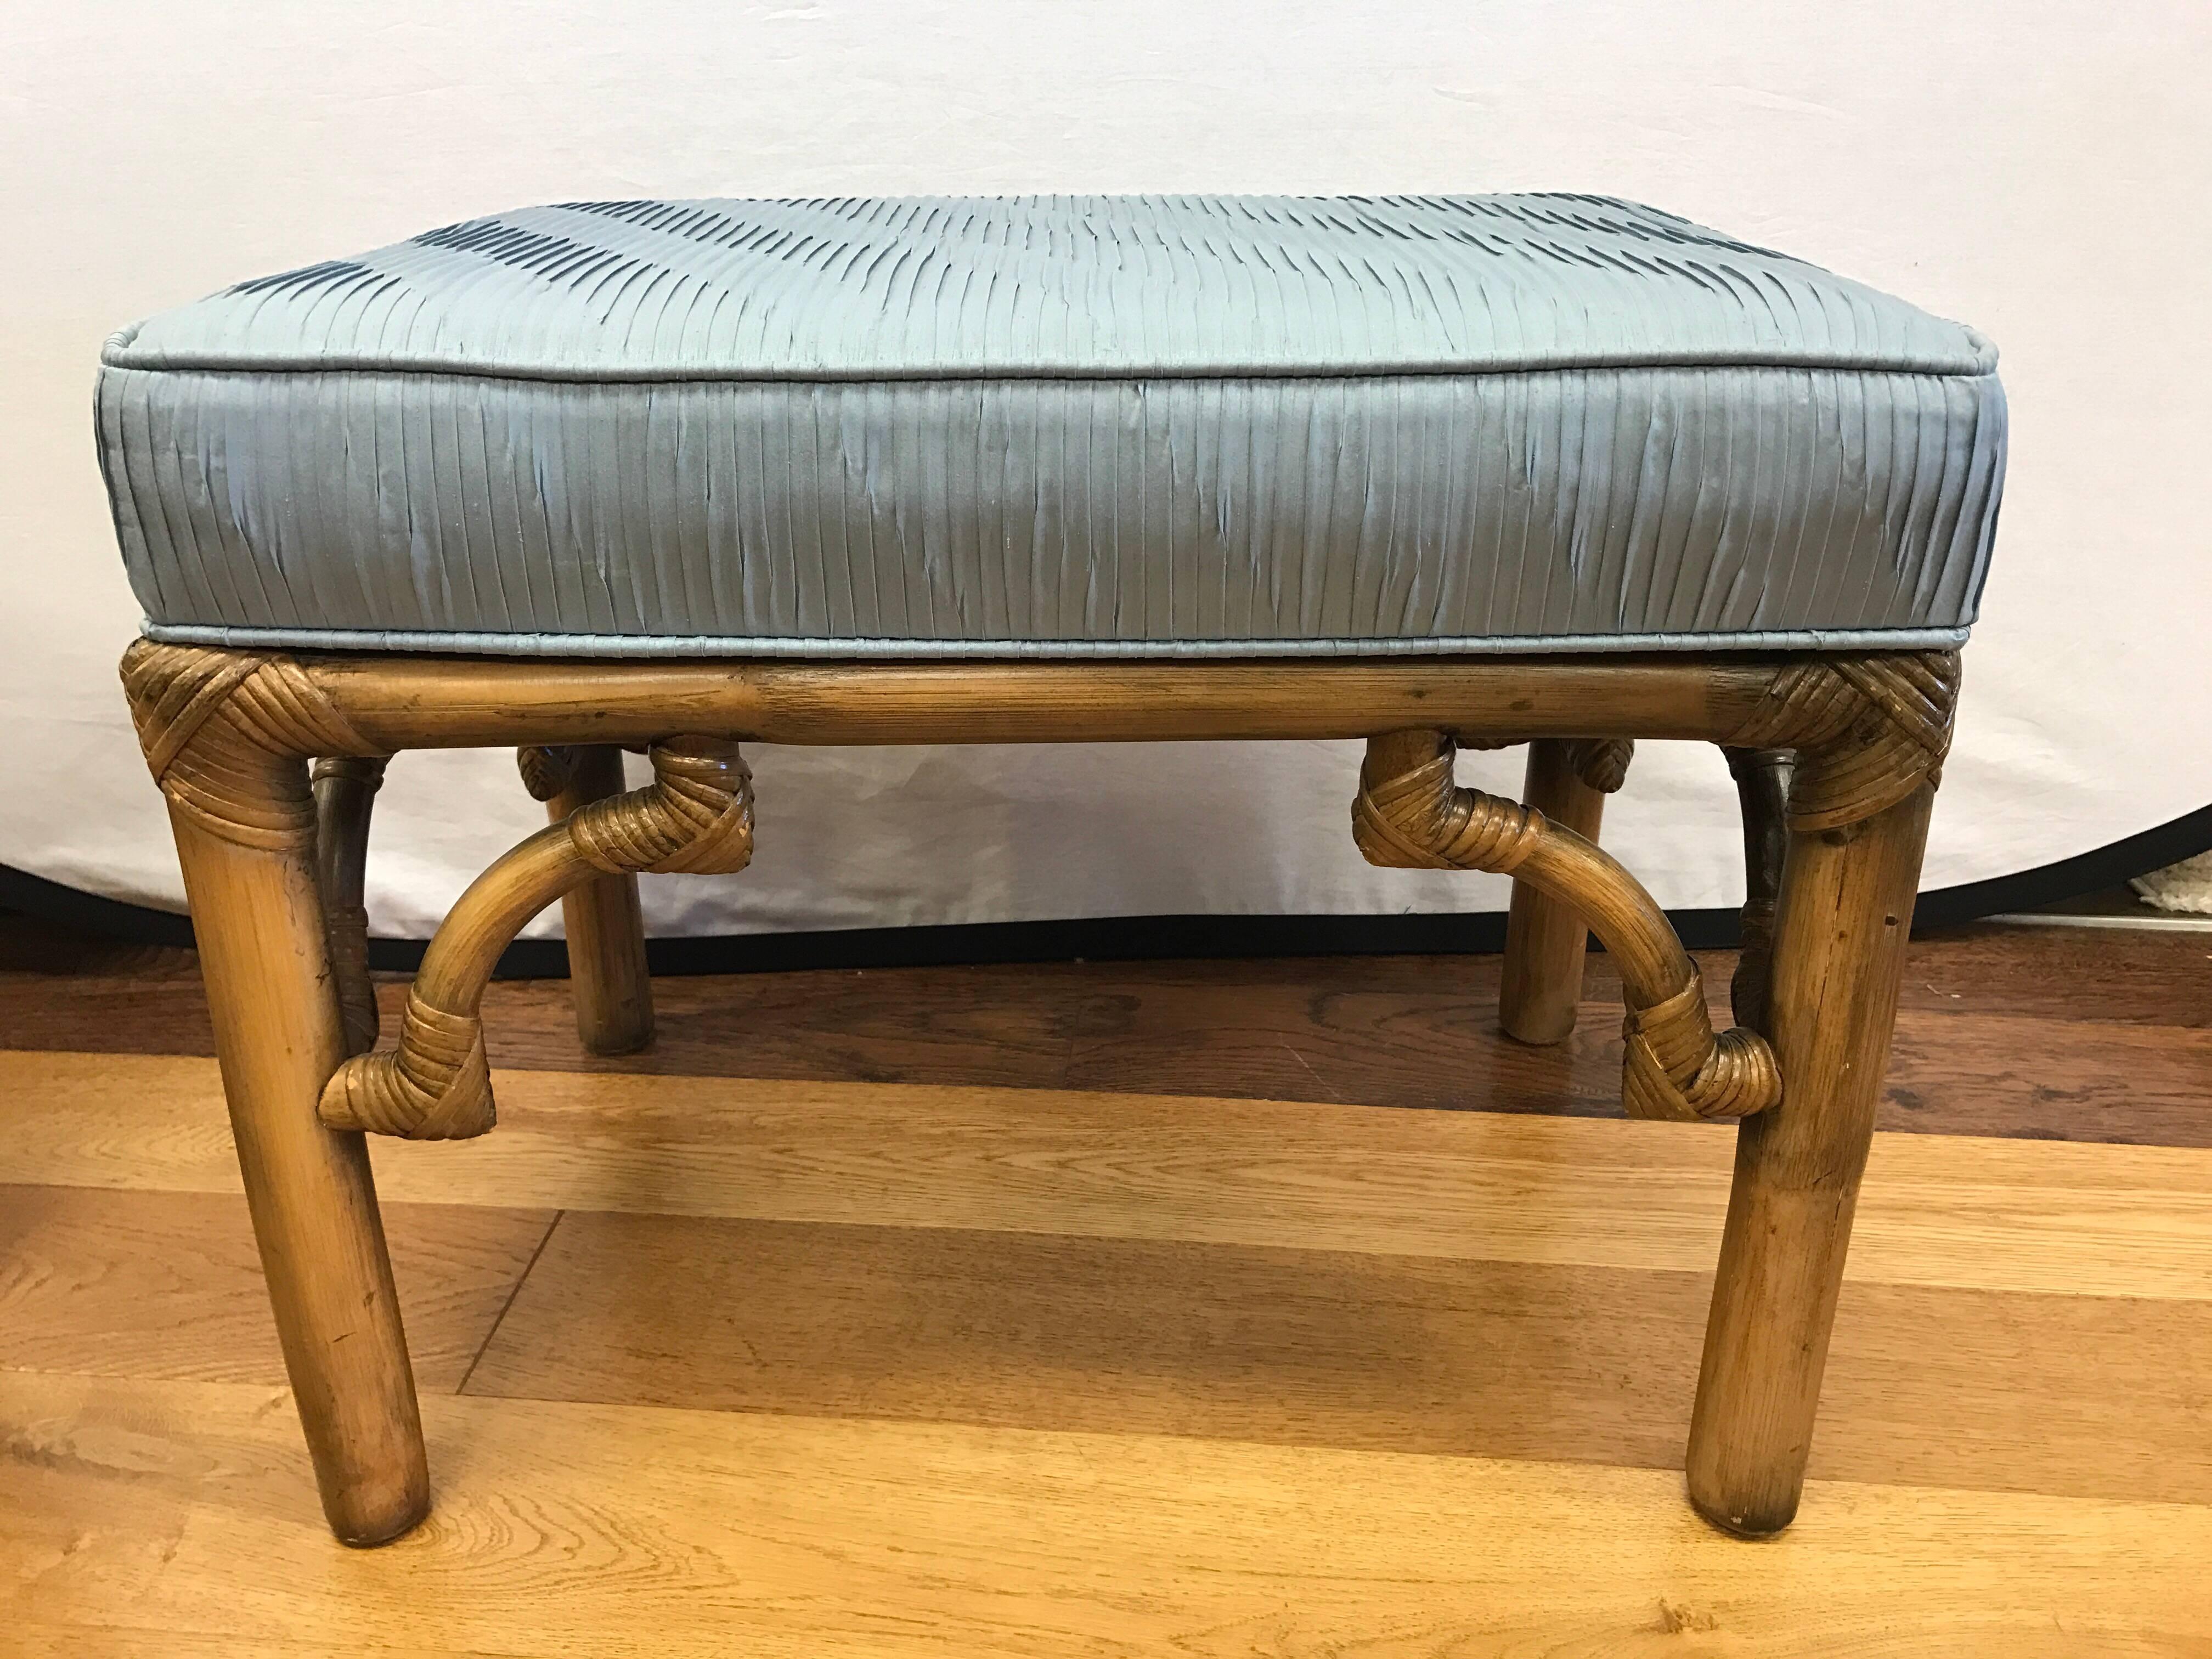 Pair of midcentury bamboo benches upholstered in a light blue, pleated silk fabric.